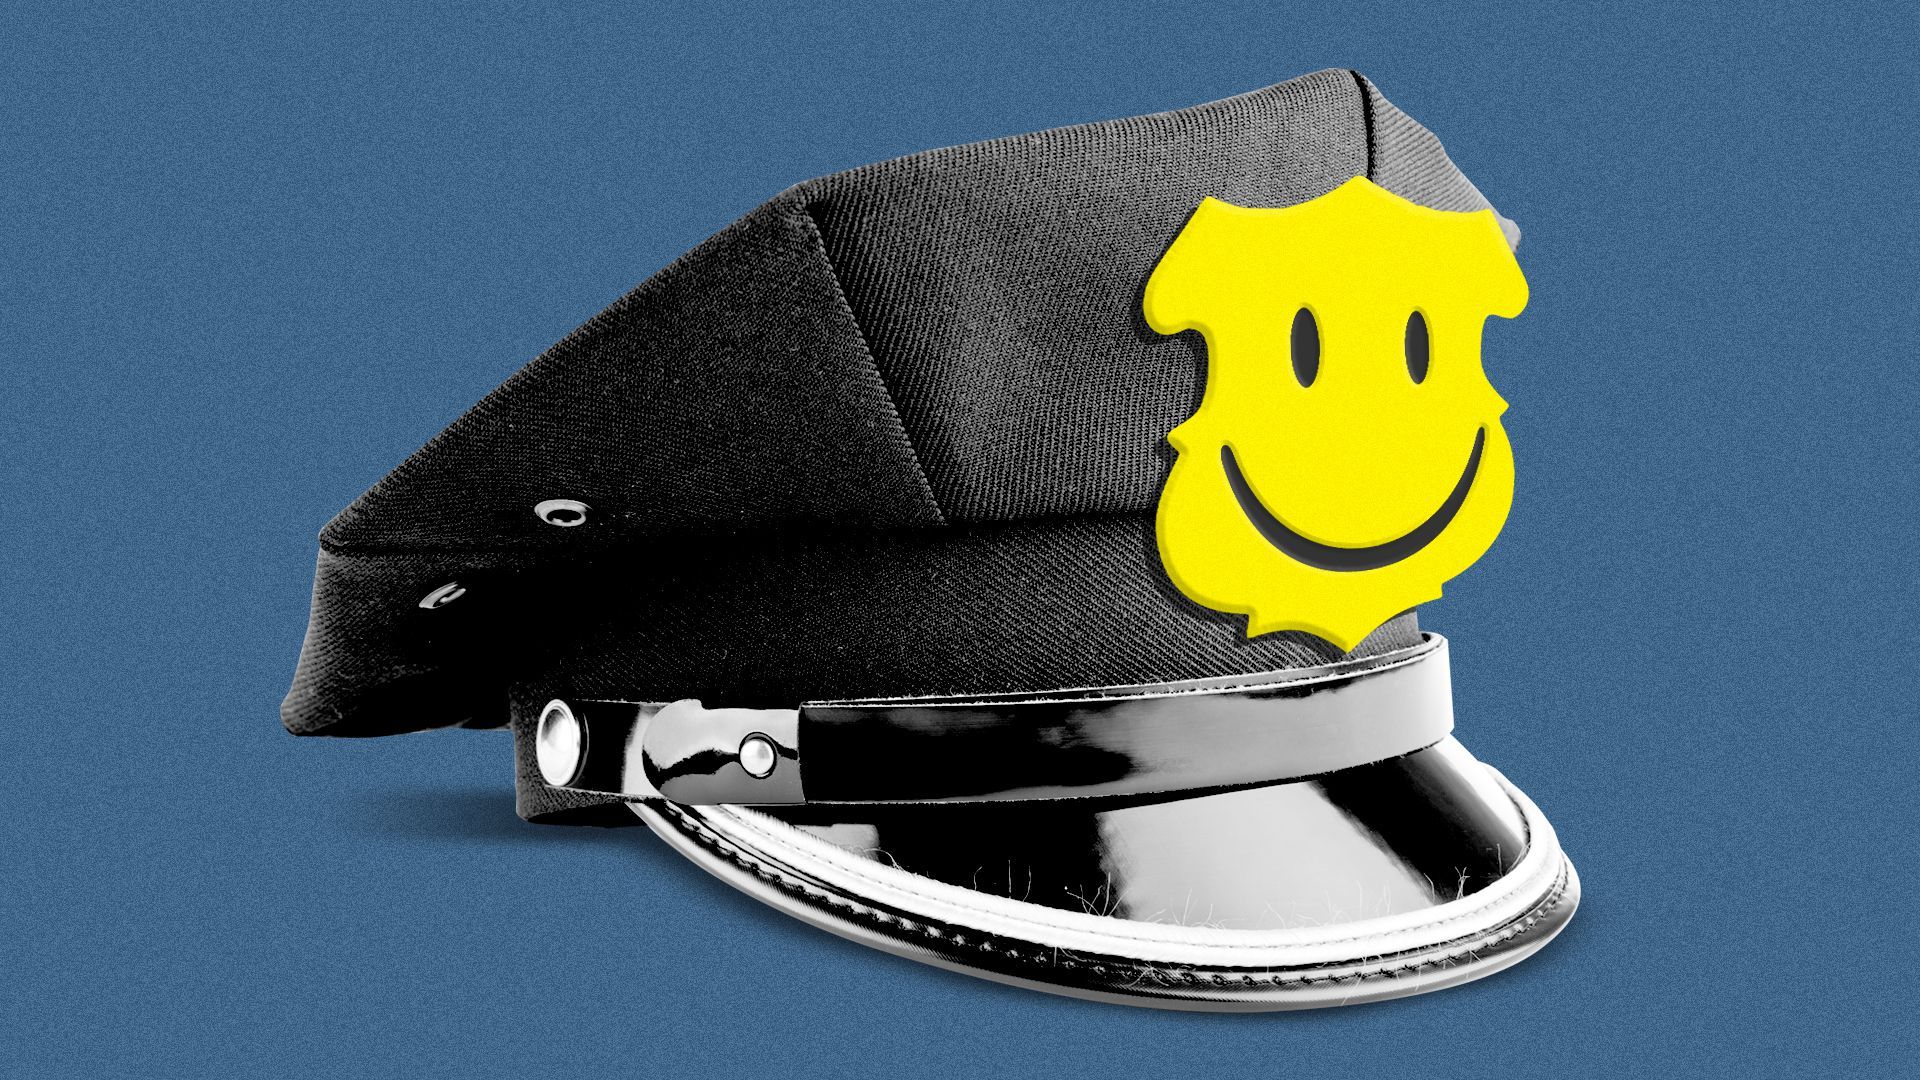 Illustration of a police hat with a smiley face on the badge.